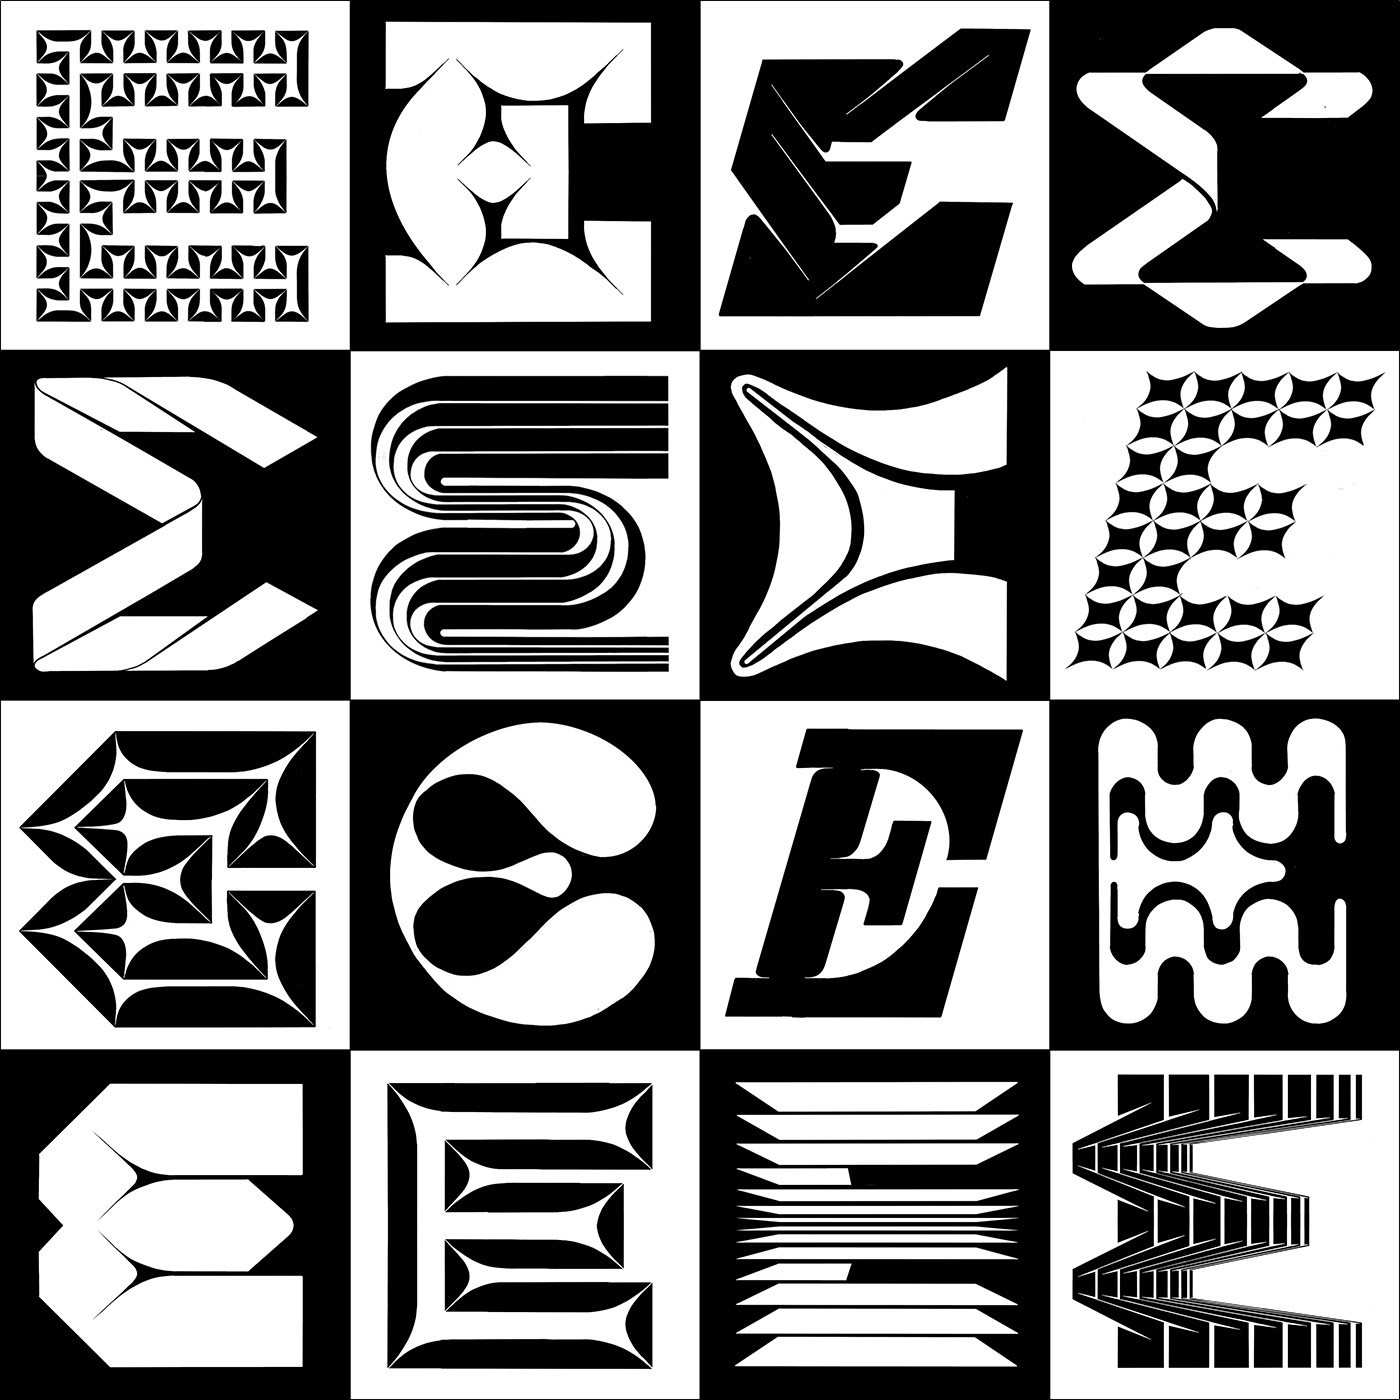 type Typeface type design 36daysoftype lettering vector alphabet letters font numbers